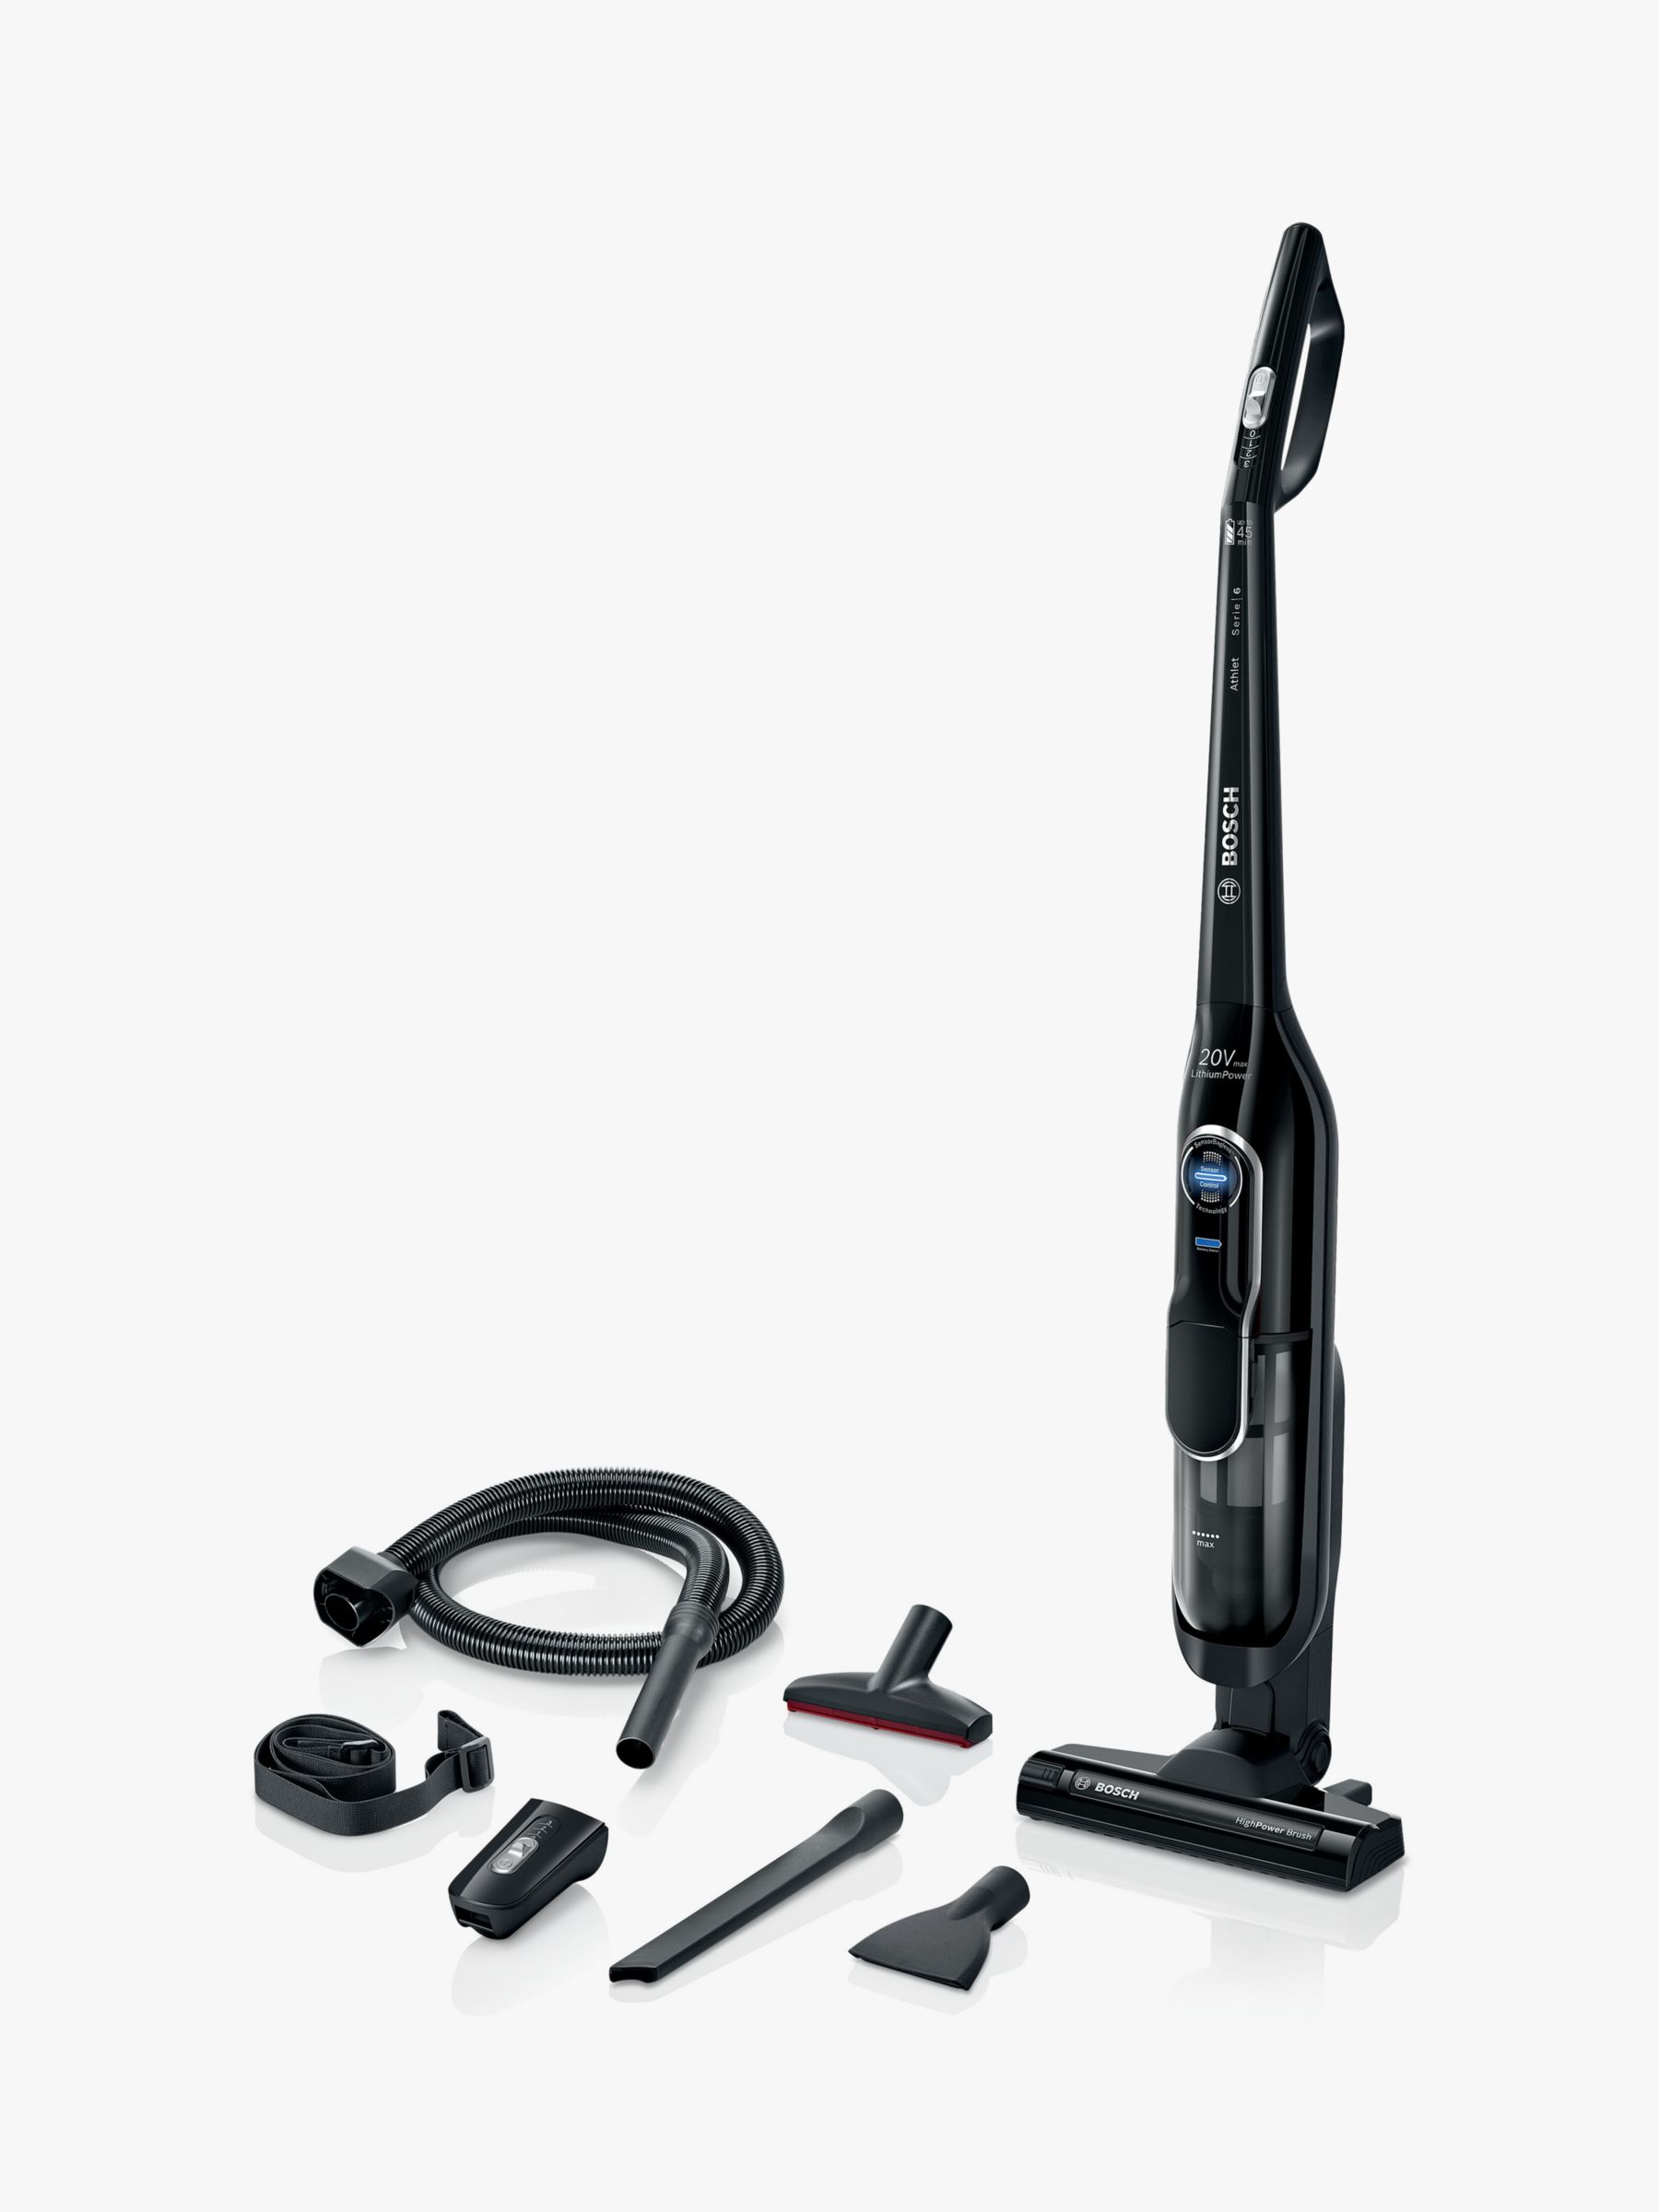 Bosch BCH85KITGB Series 6 ProClean Athlet Cordless Vacuum with Attachments, Black